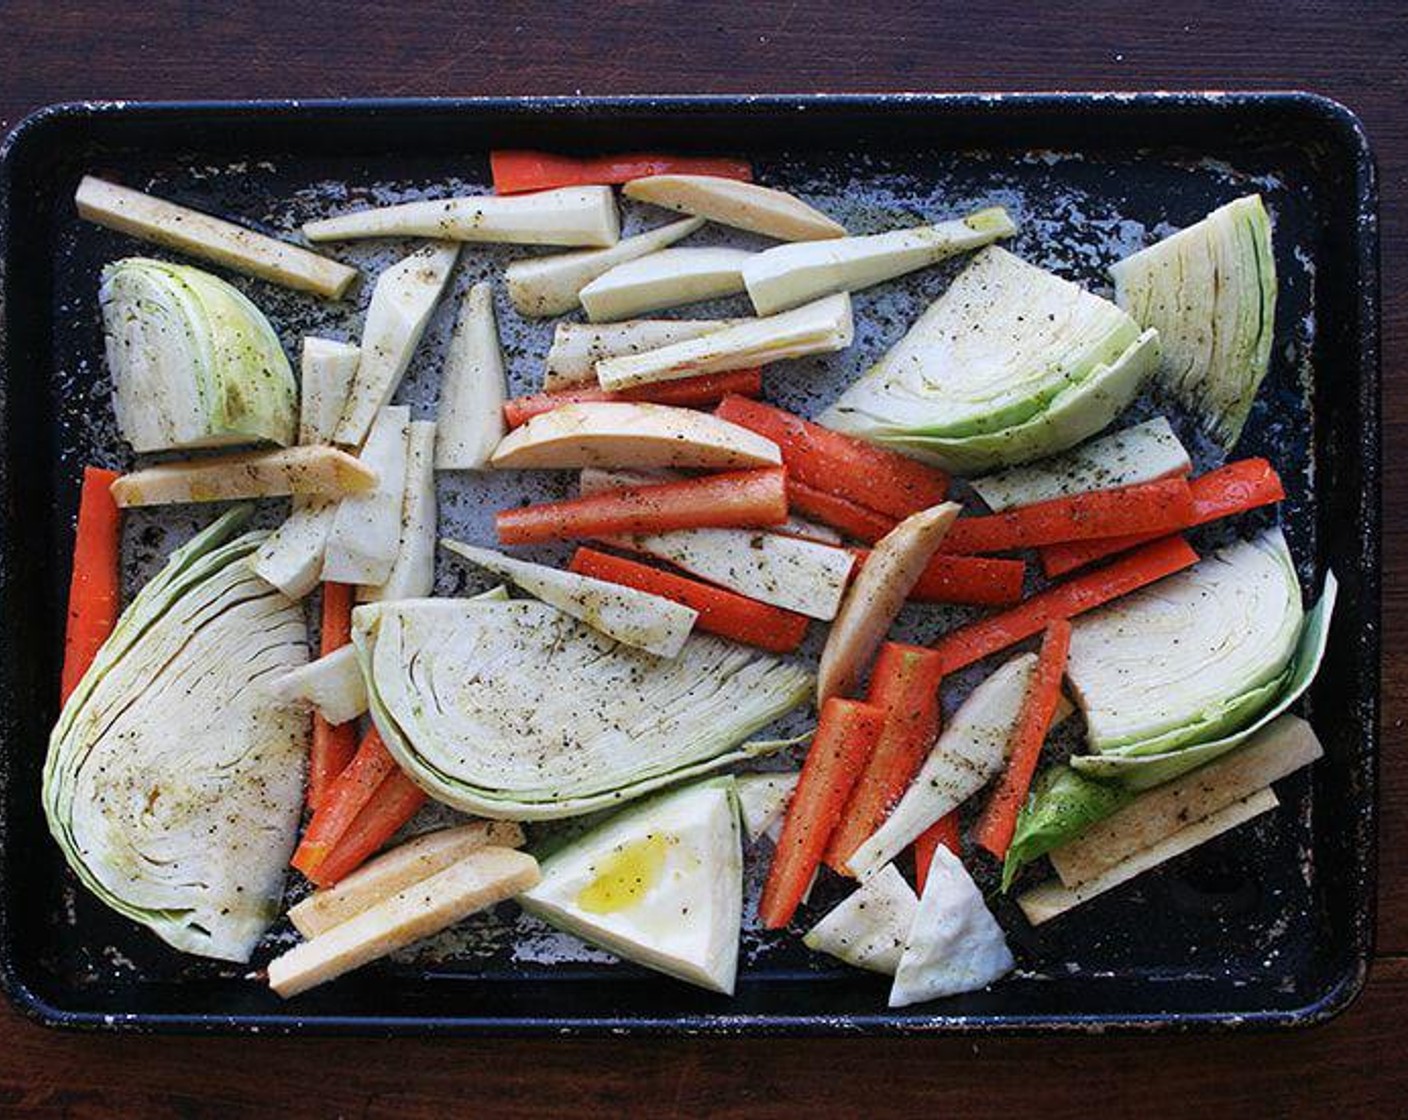 step 3 Spread vegetables onto a sheet pan. Season with Kosher Salt (to taste) and Freshly Ground Black Pepper (to taste). Drizzle with Olive Oil (2 Tbsp) to coat. Toss gently, then spread in an even layer. Roast for 20 minutes.